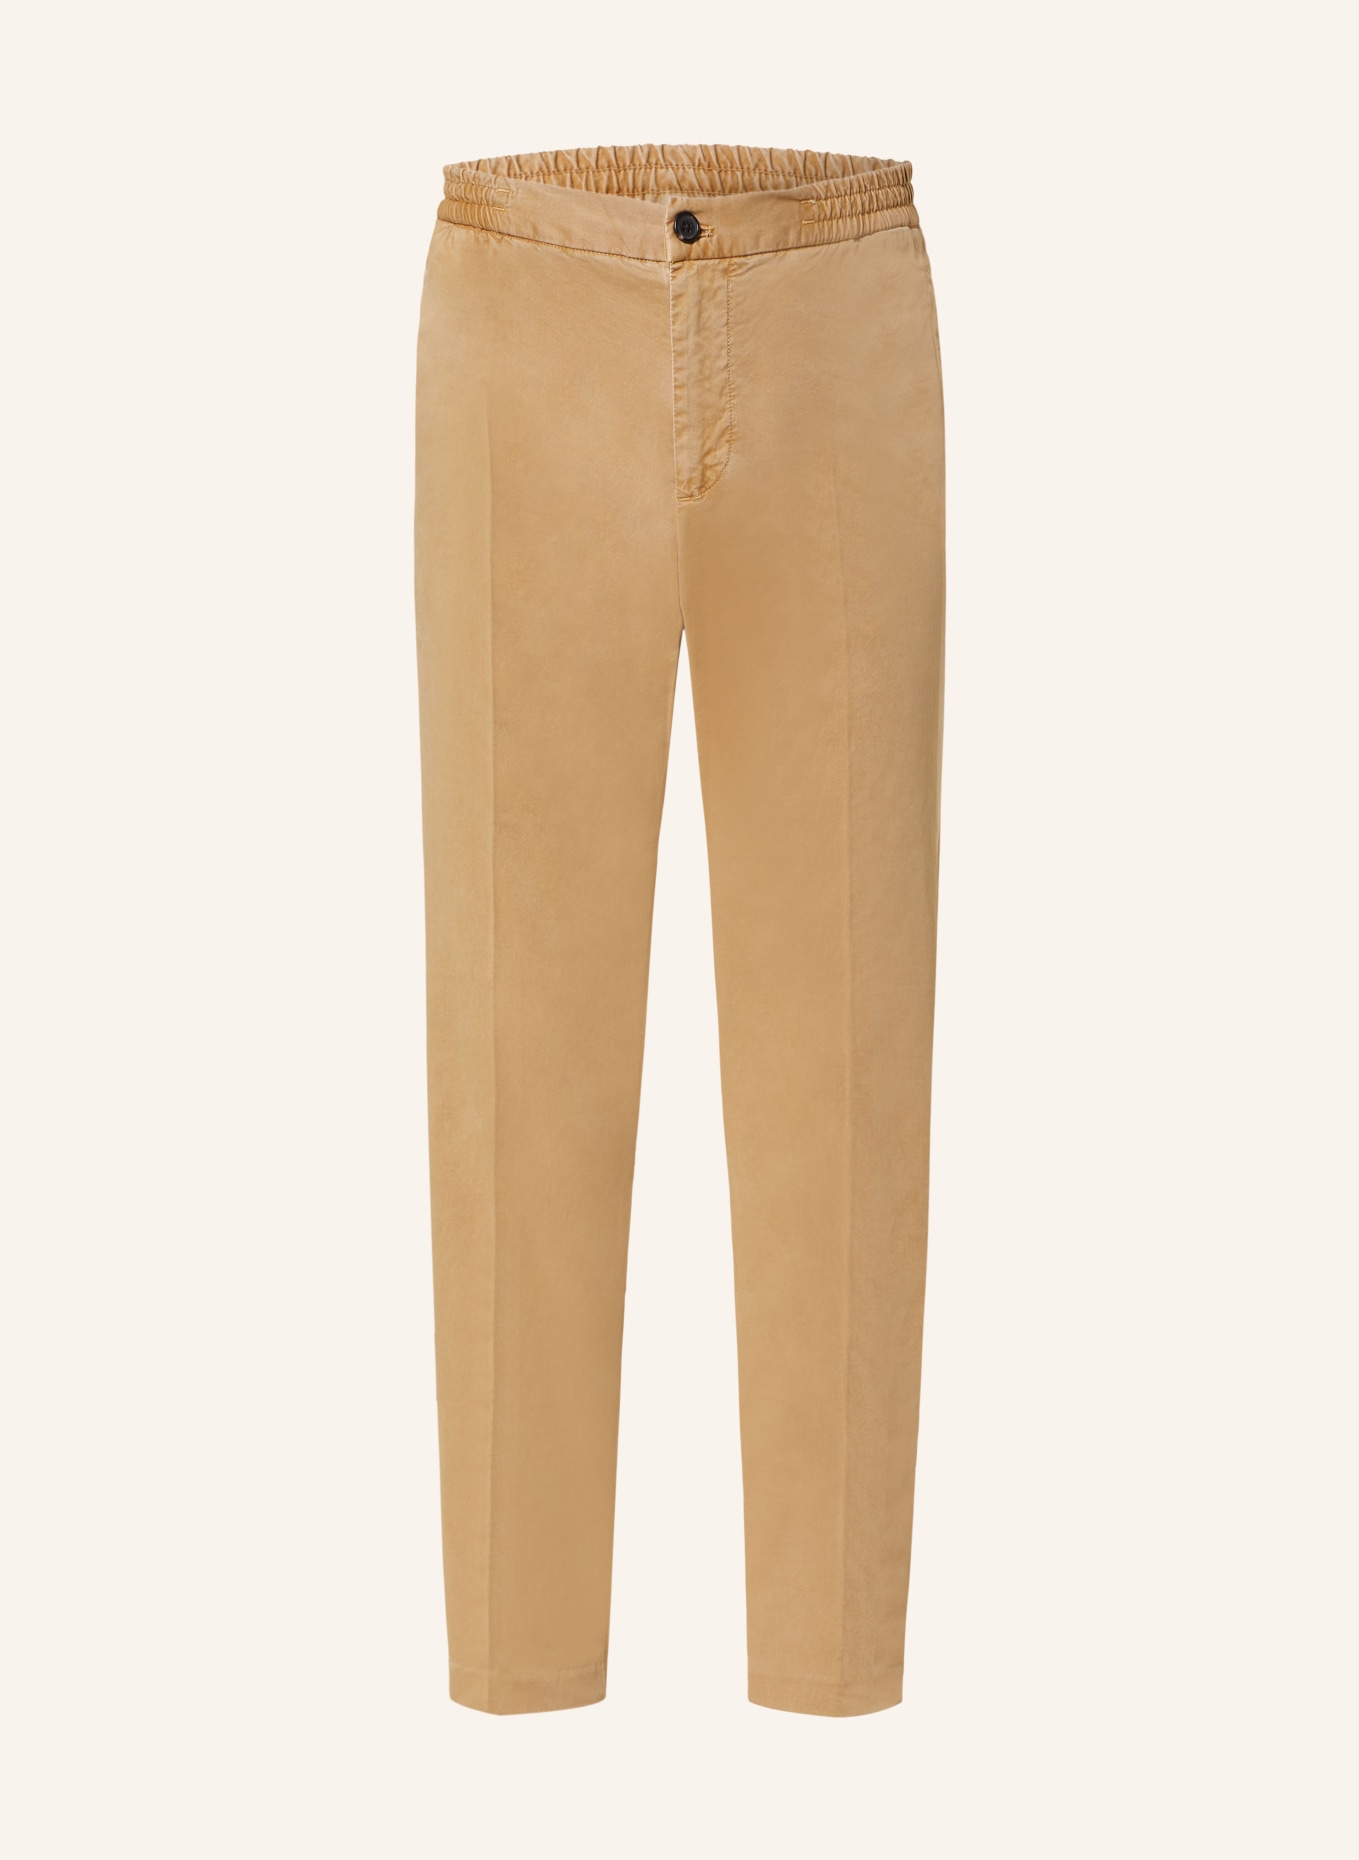 TOMMY HILFIGER Chino HARLEM Relaxed Tapered Fit, Farbe: KHAKI (Bild 1)